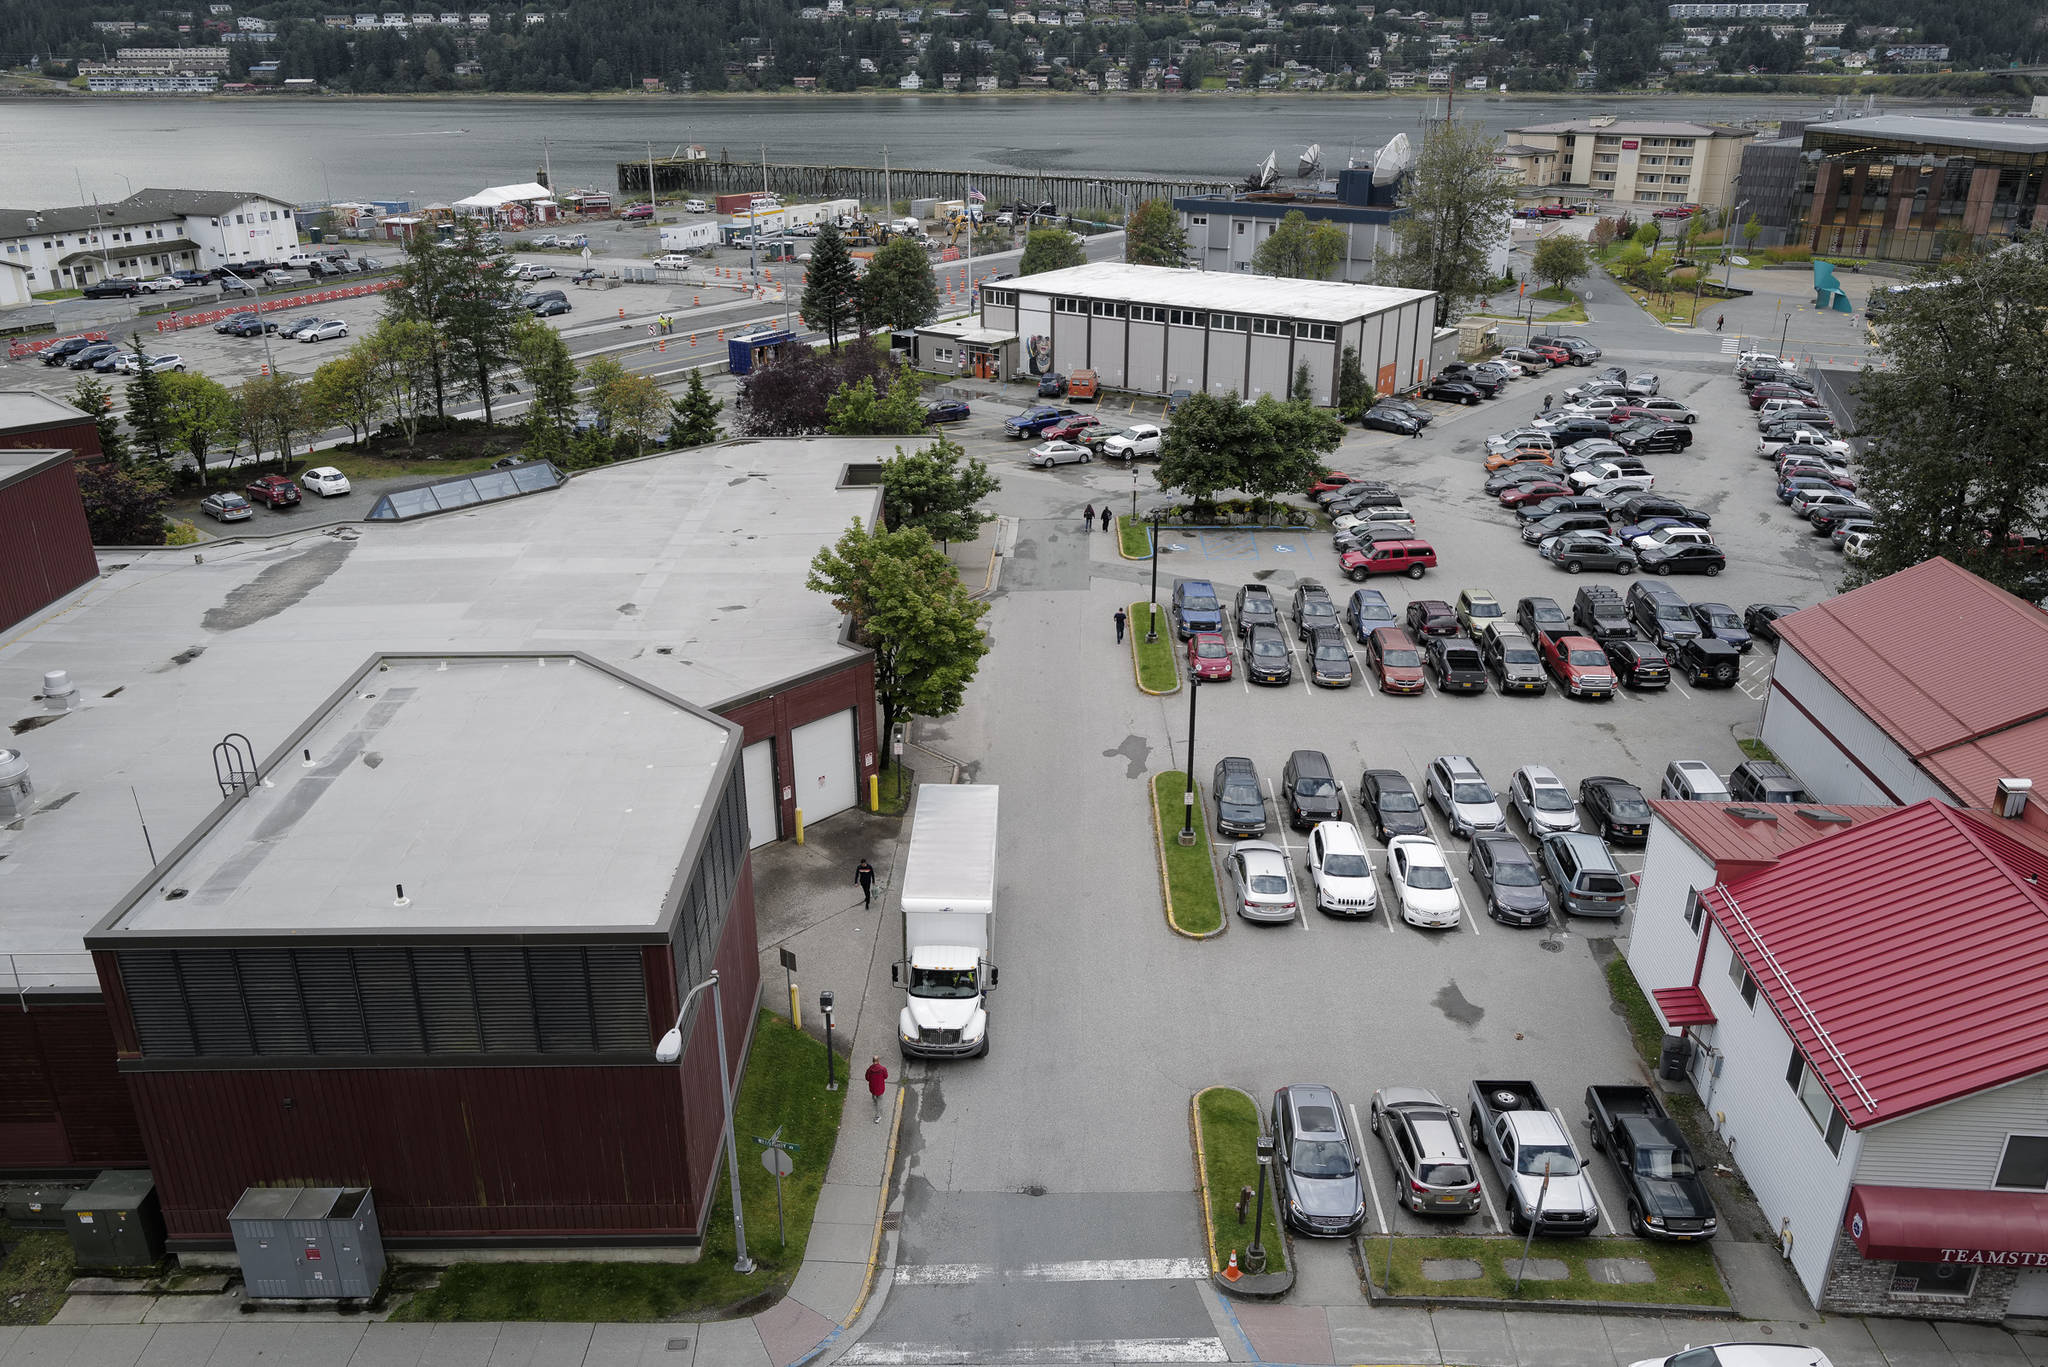 Centennial Hall, left and the Juneau Arts Culture Center, center, seen in this August 2019 photo are providing shelter for homeless people in Juneau in light of the COVID-19 pandemic and recent spell of cold weather. (Michael Penn | Juneau Empire)